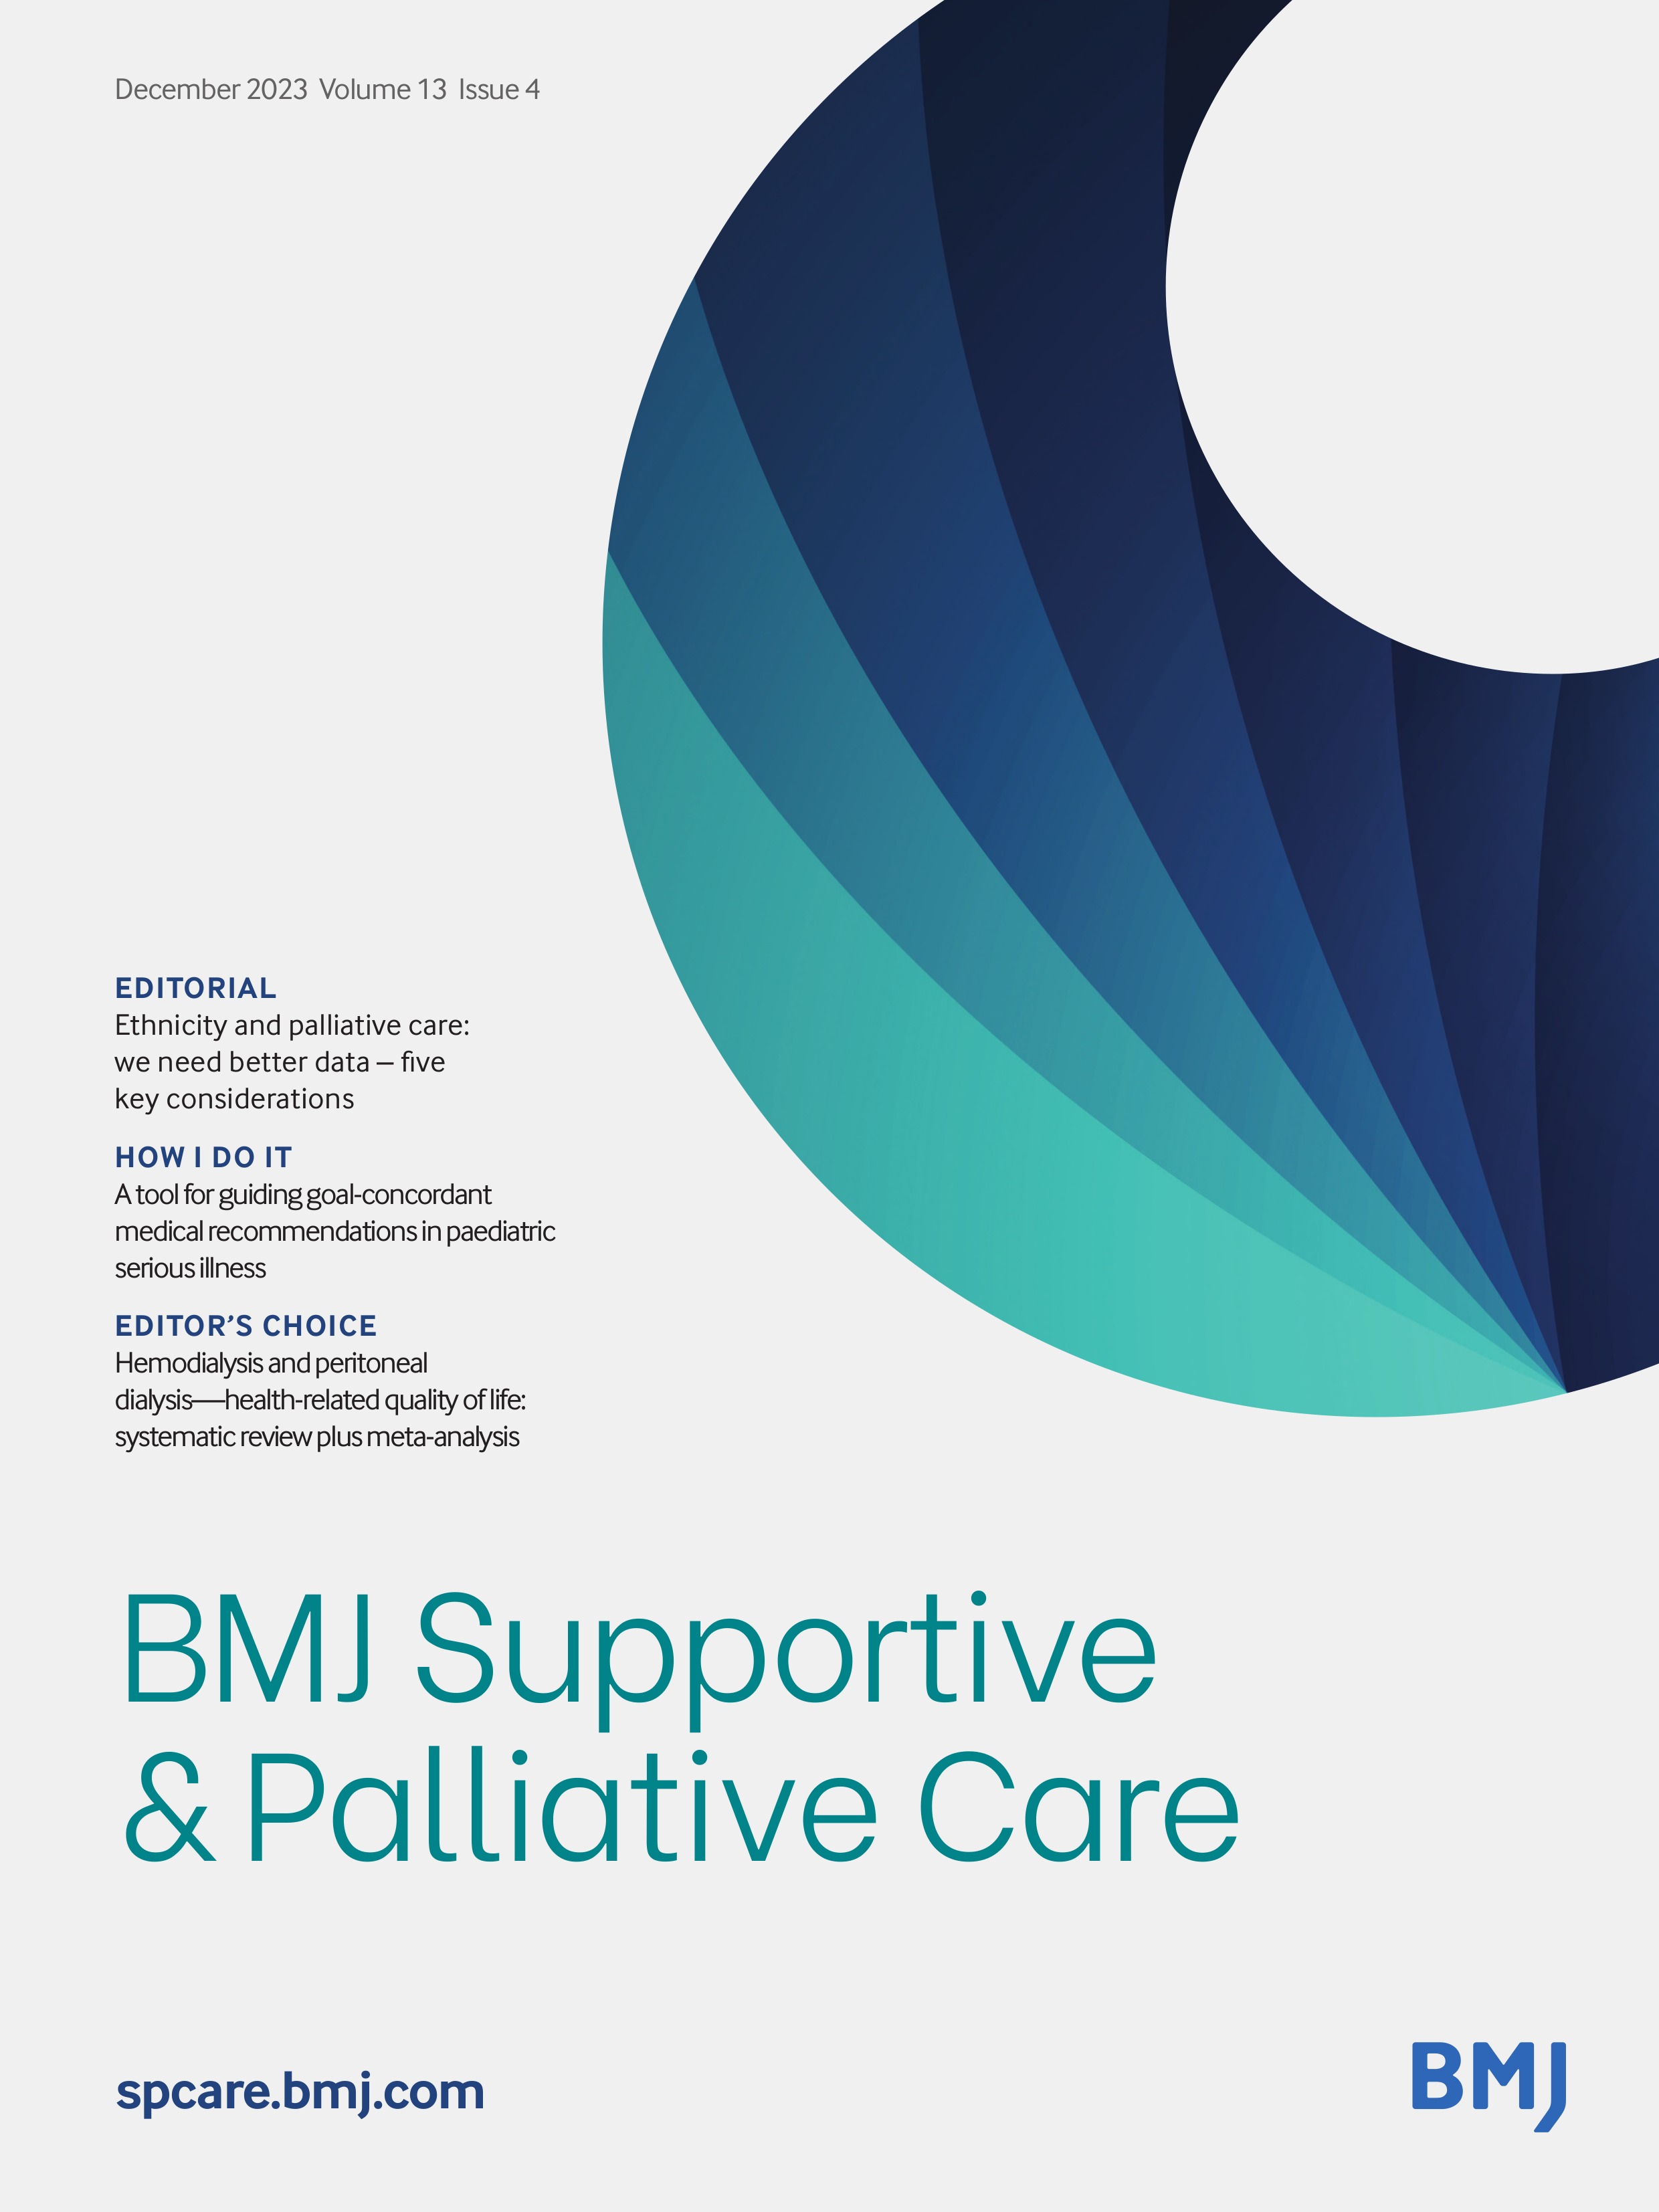 Ethnicity and palliative care: we need better data - five key considerations